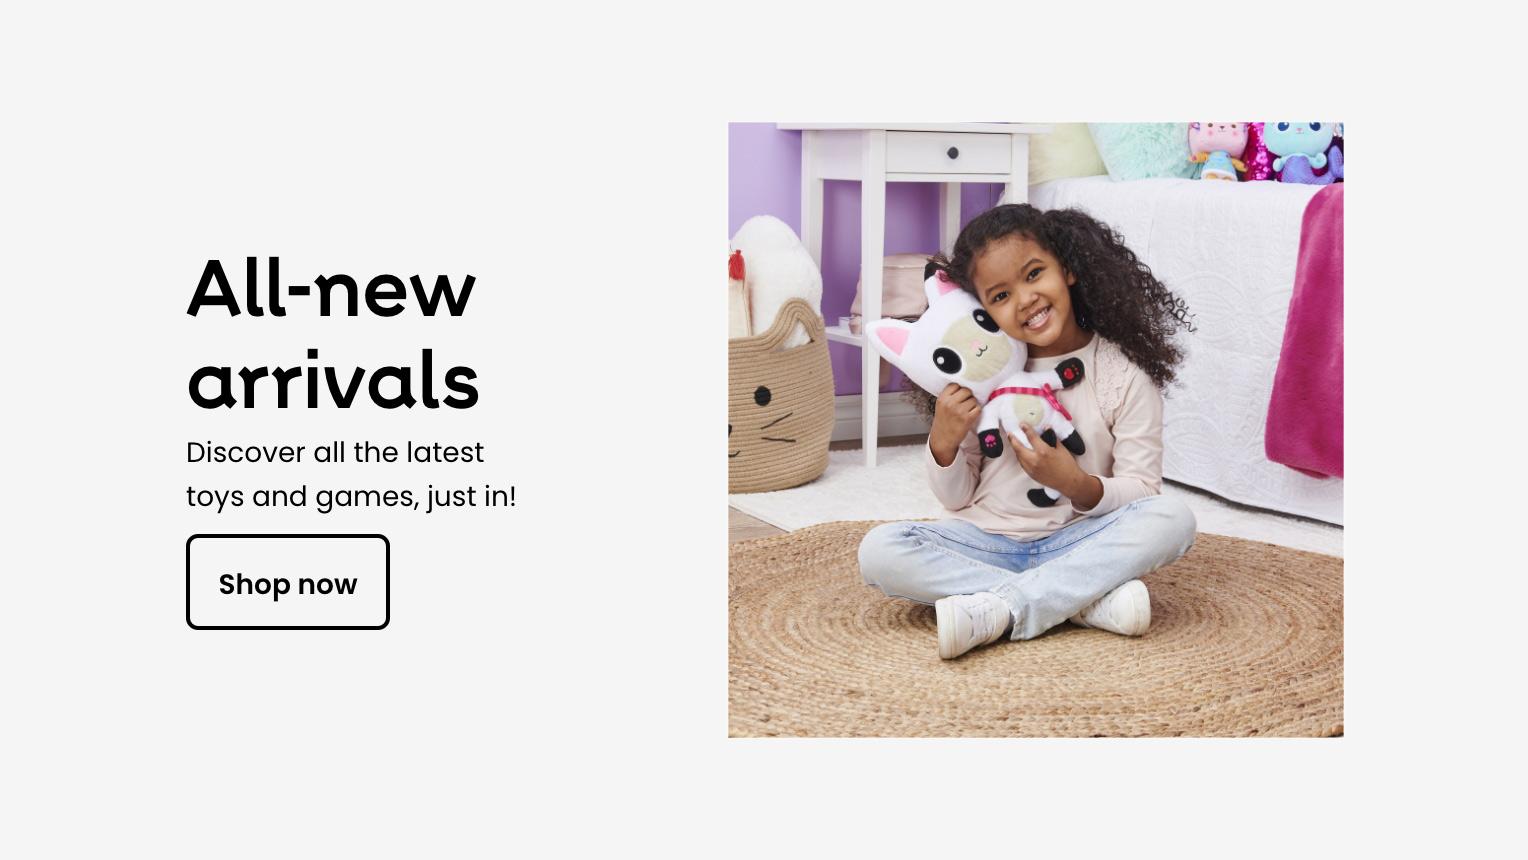 All-new arrivals. Discover all the latest toys and games, just in!